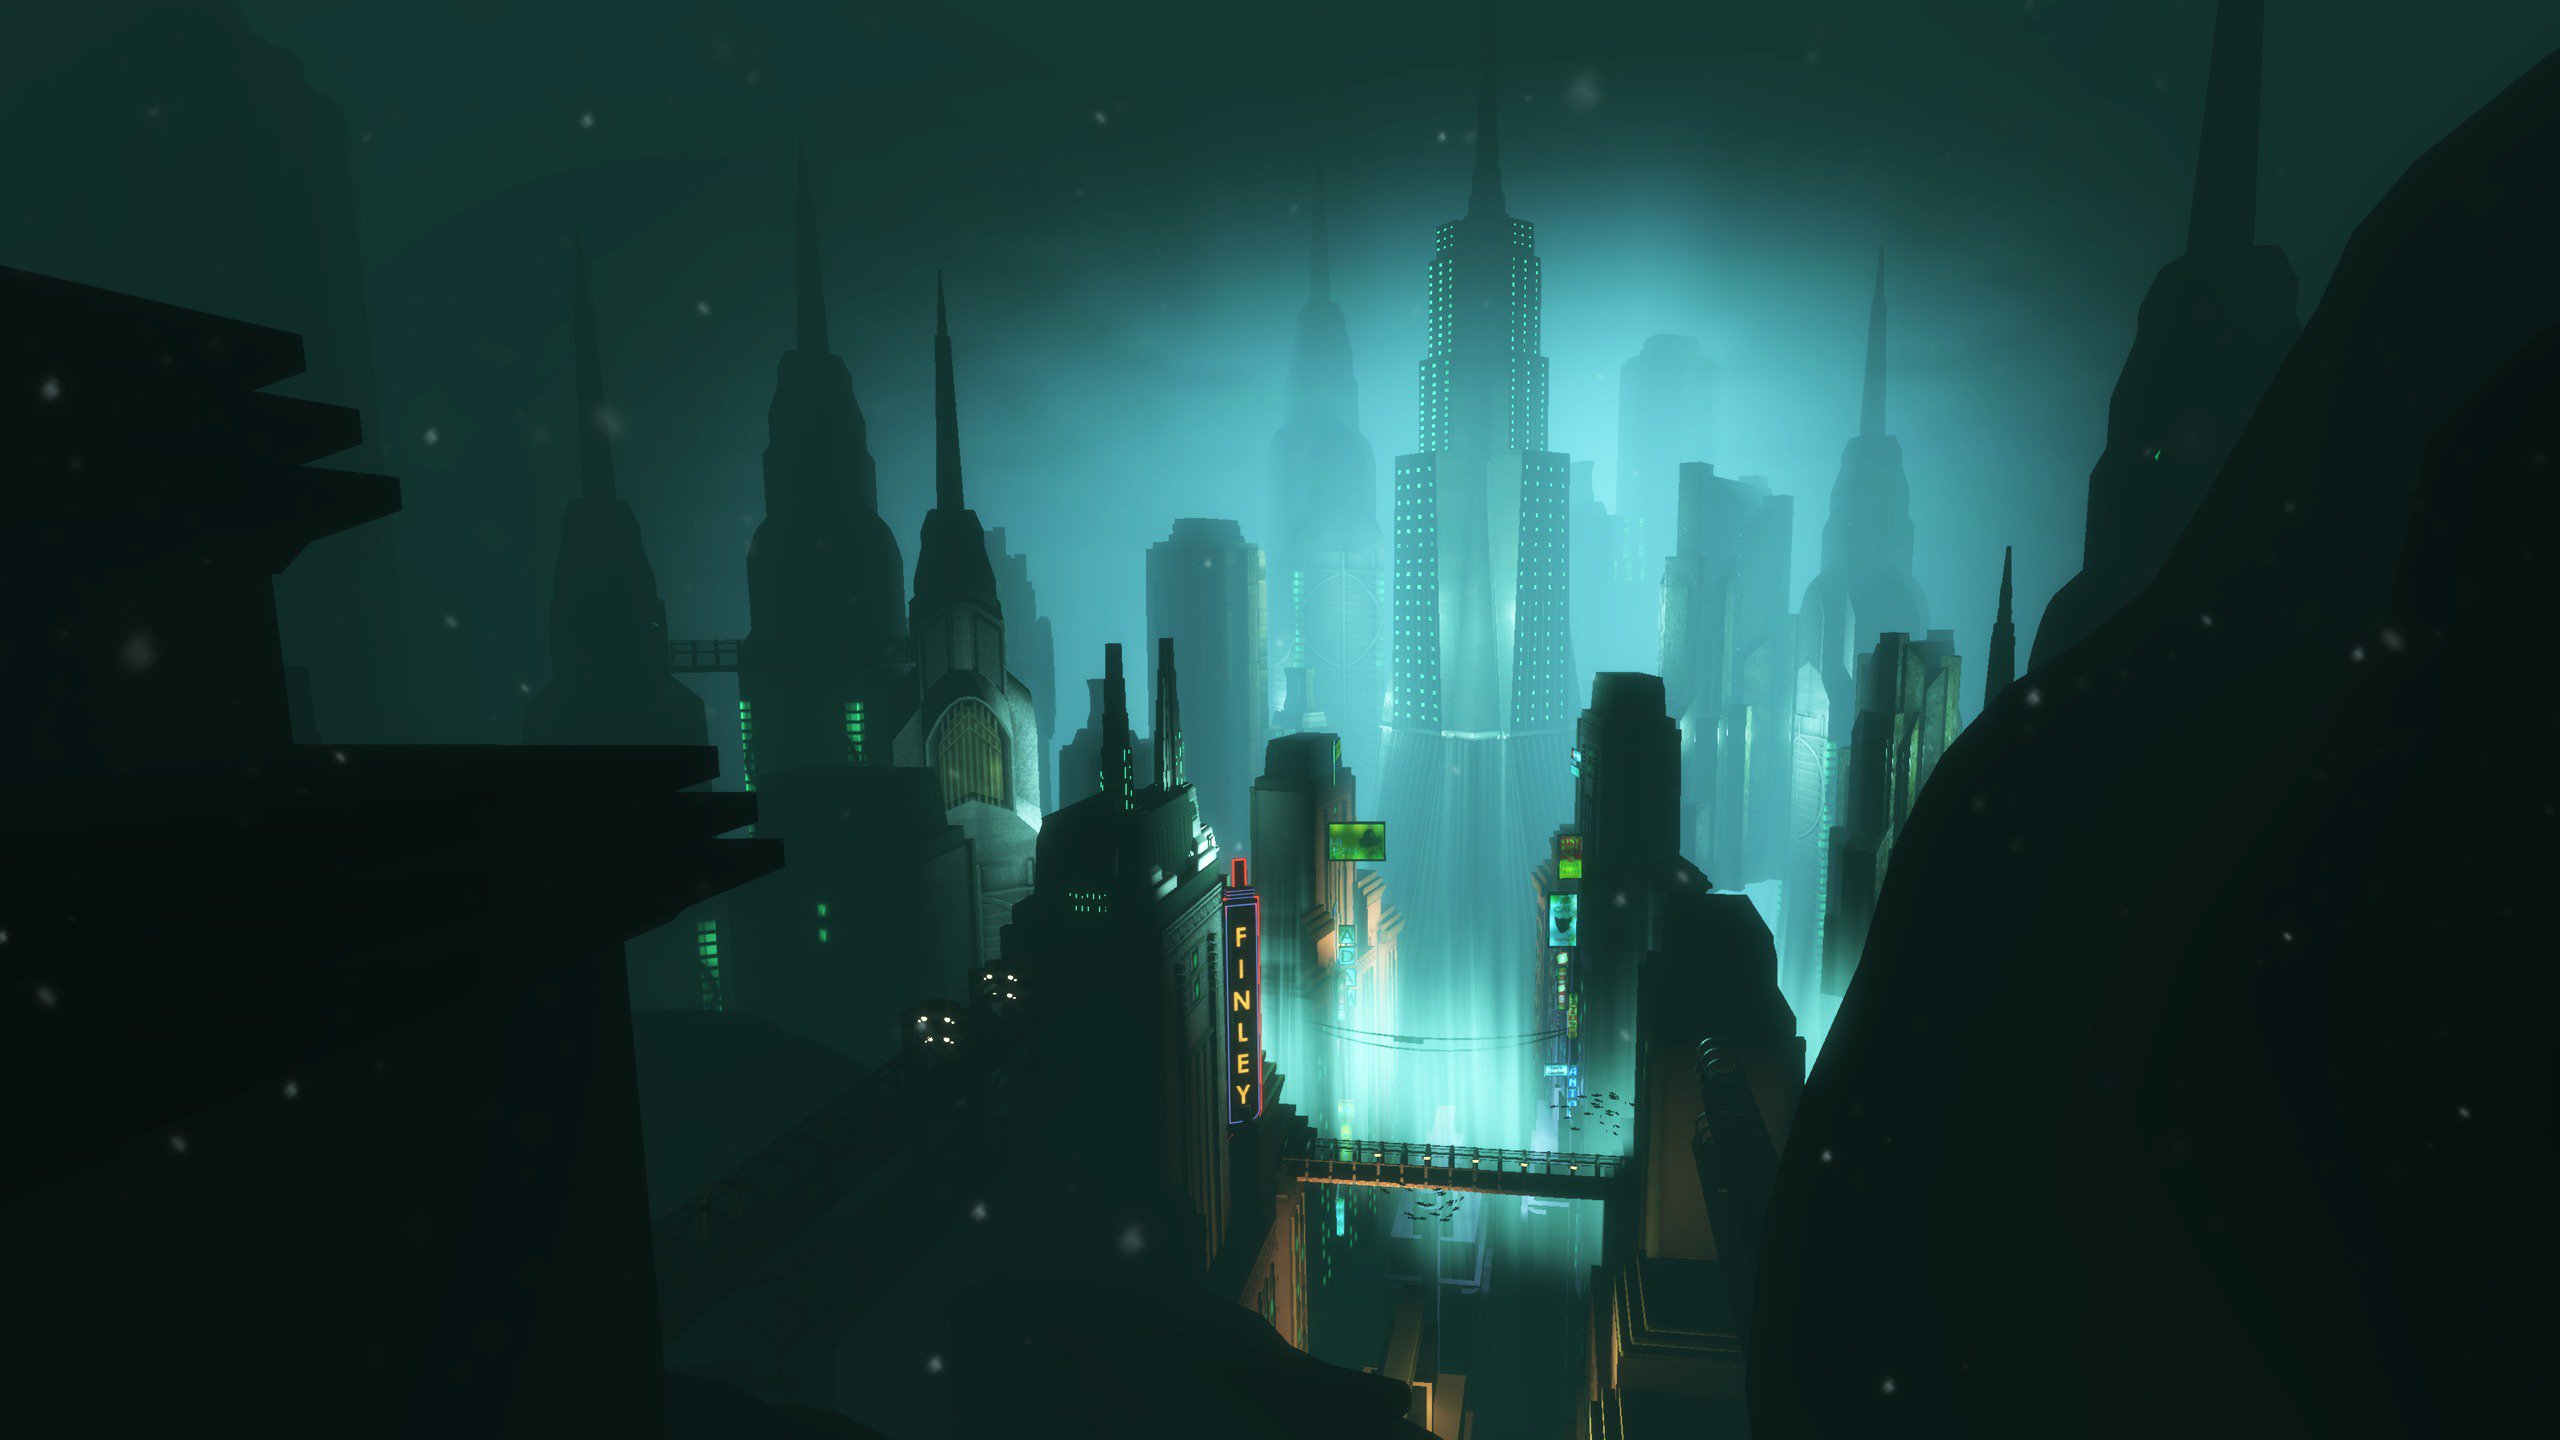 The city of Rapture